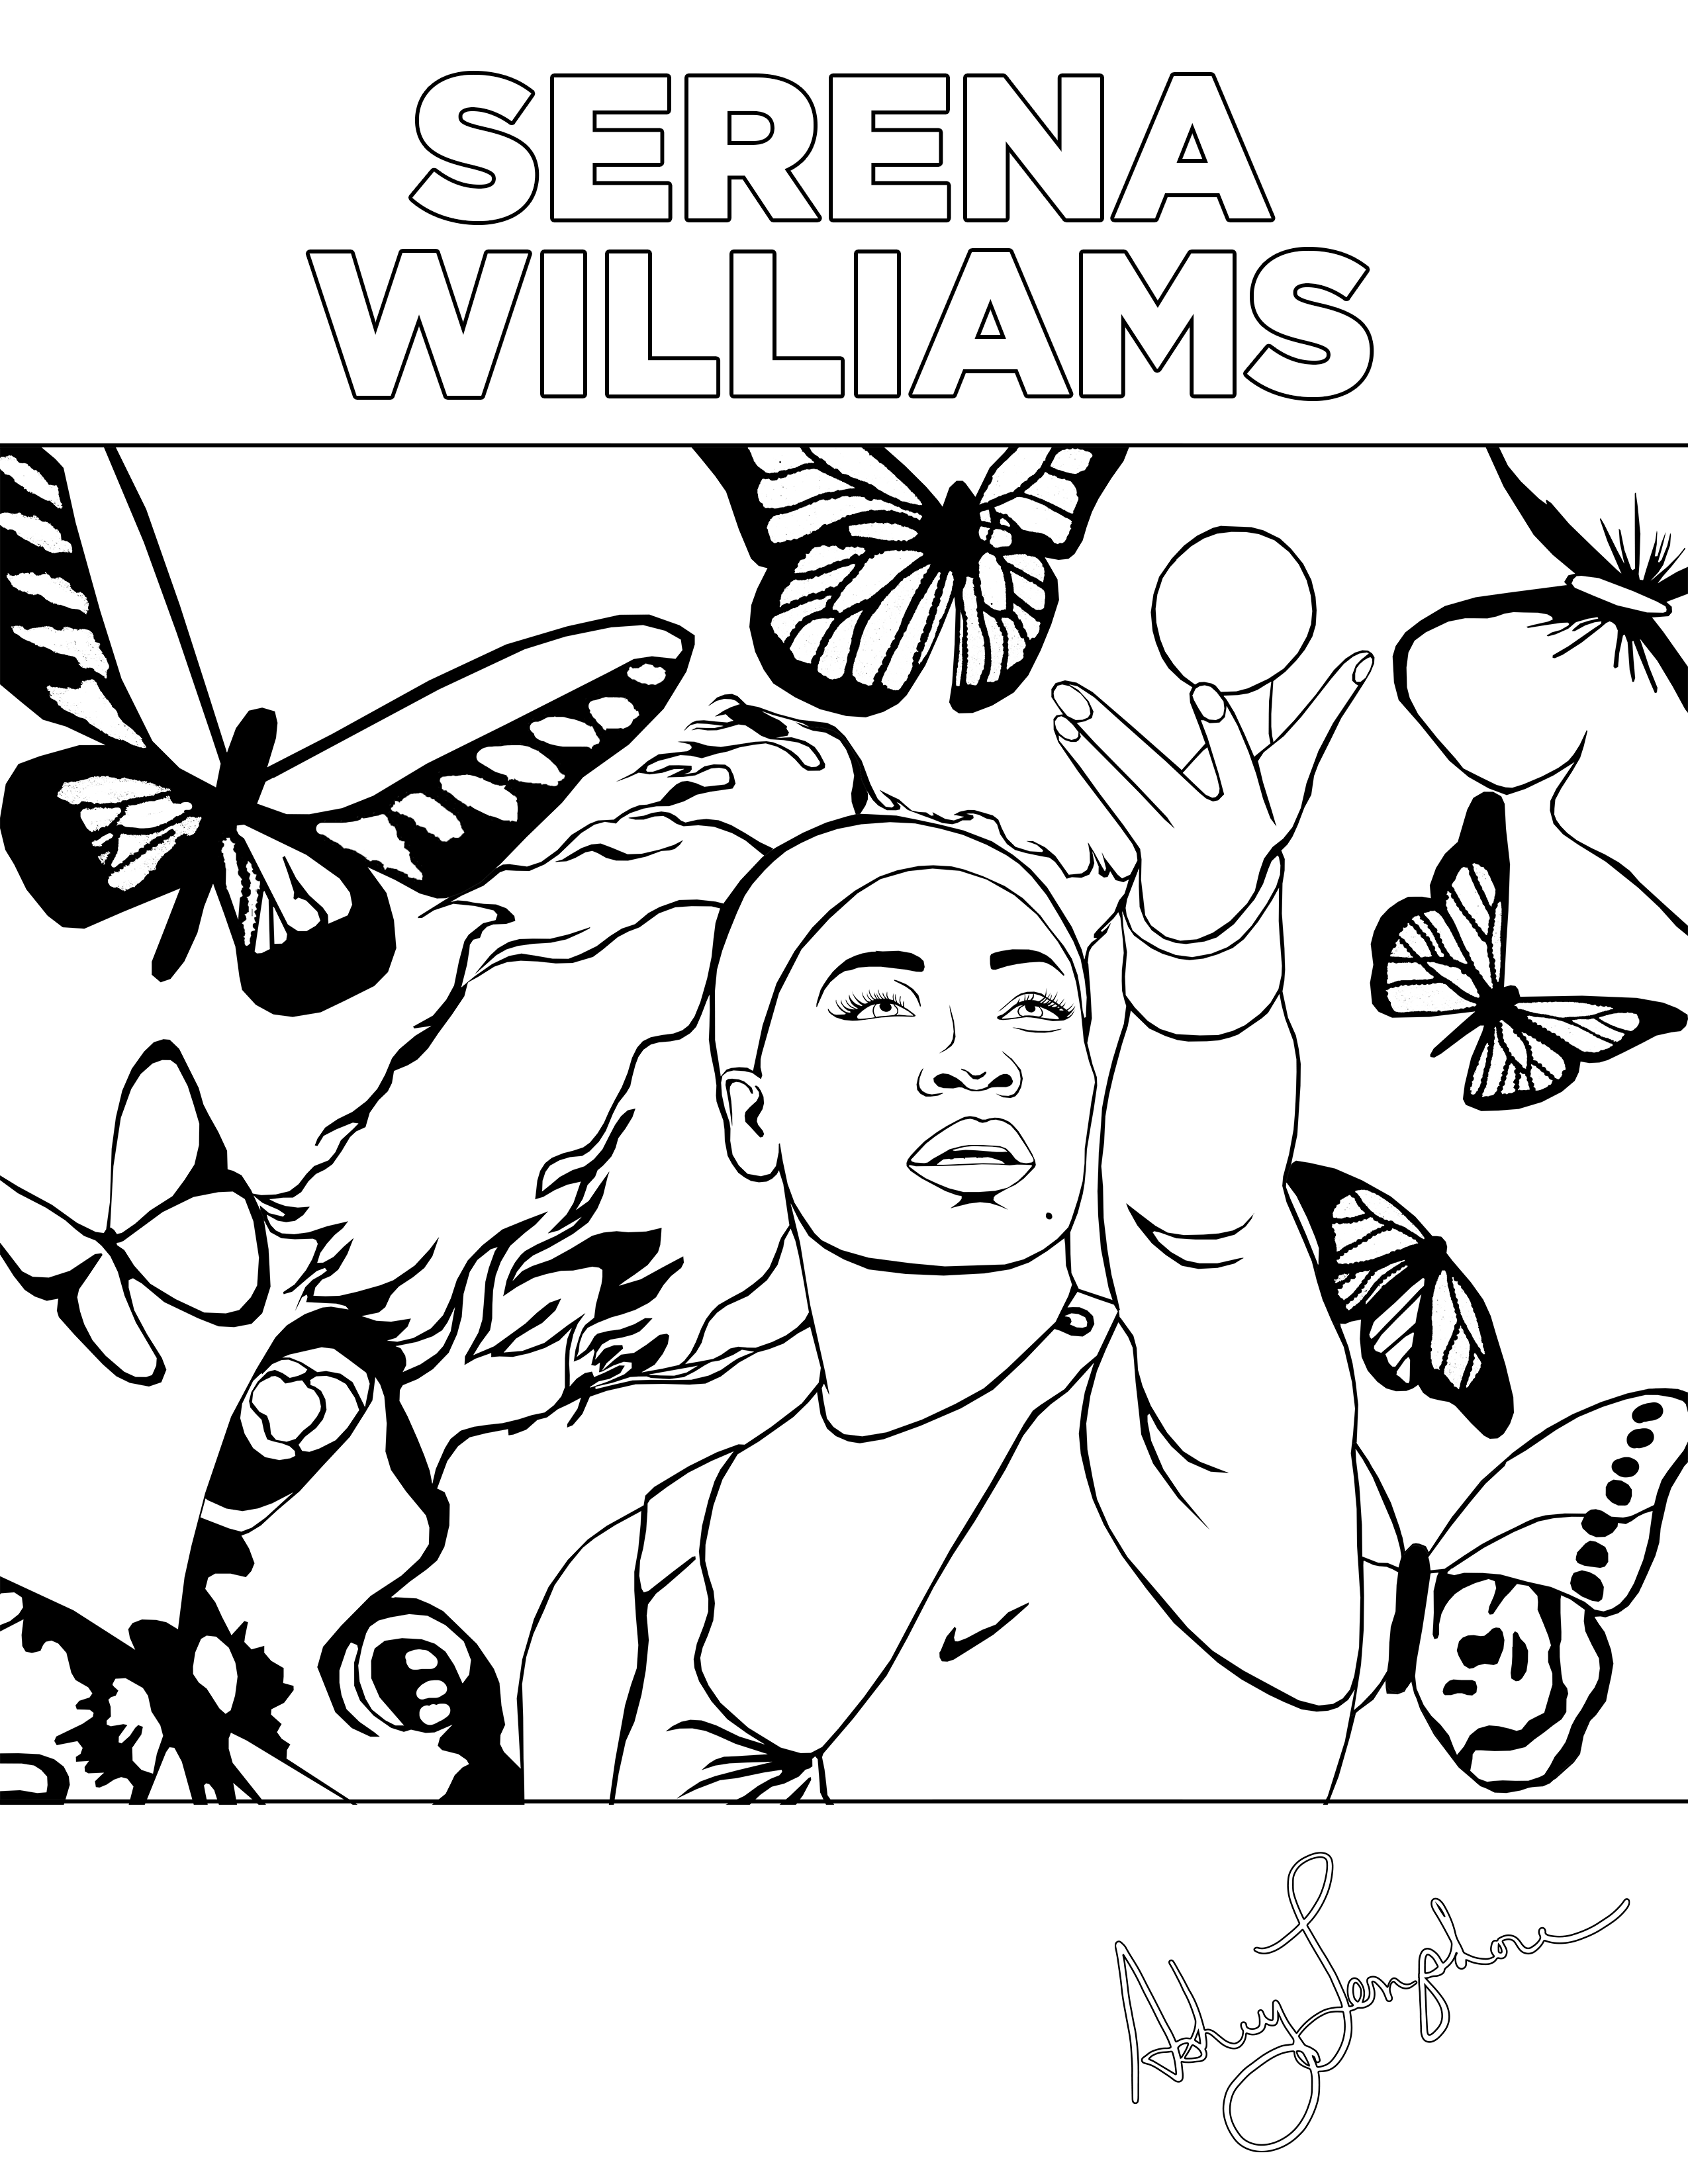 Ashley Longshore coloring pages featuring Serena Williams.